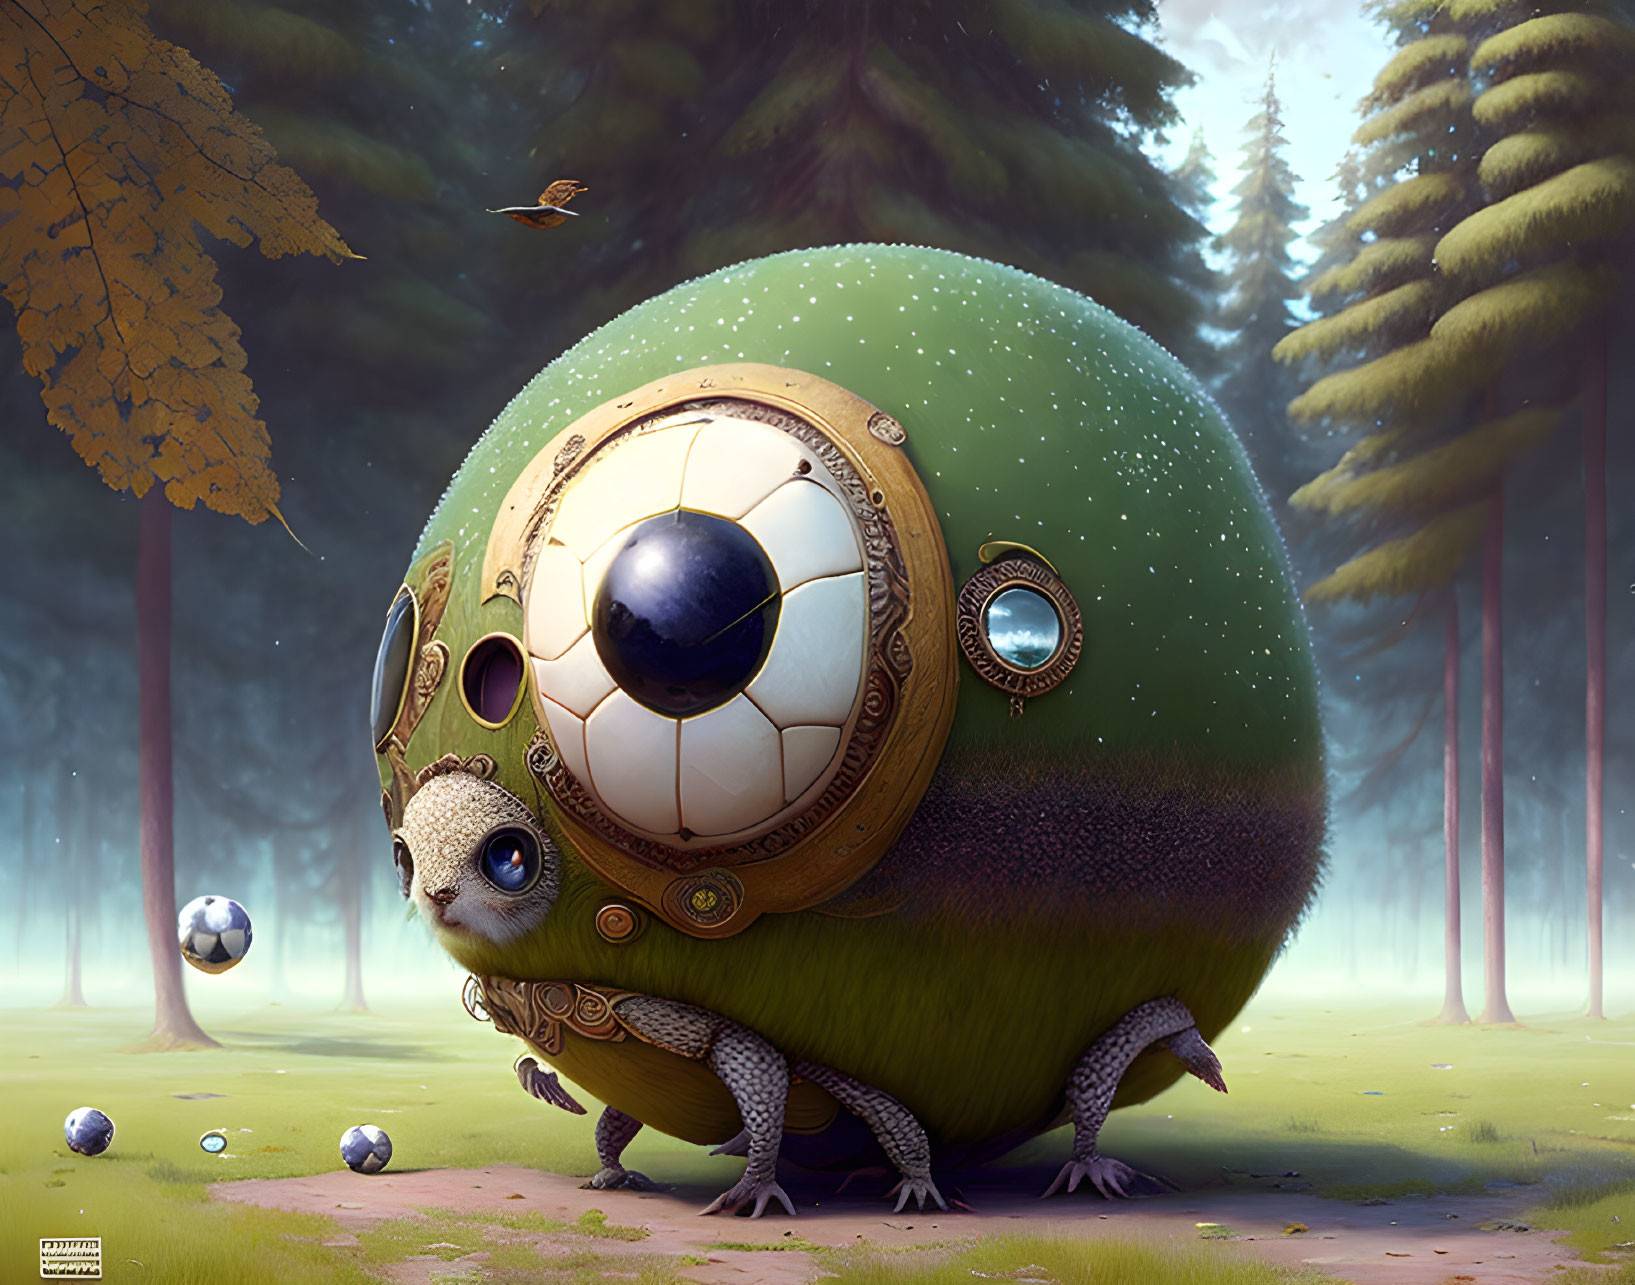 Imaginative lizard-like creature with soccer ball shell in serene forest